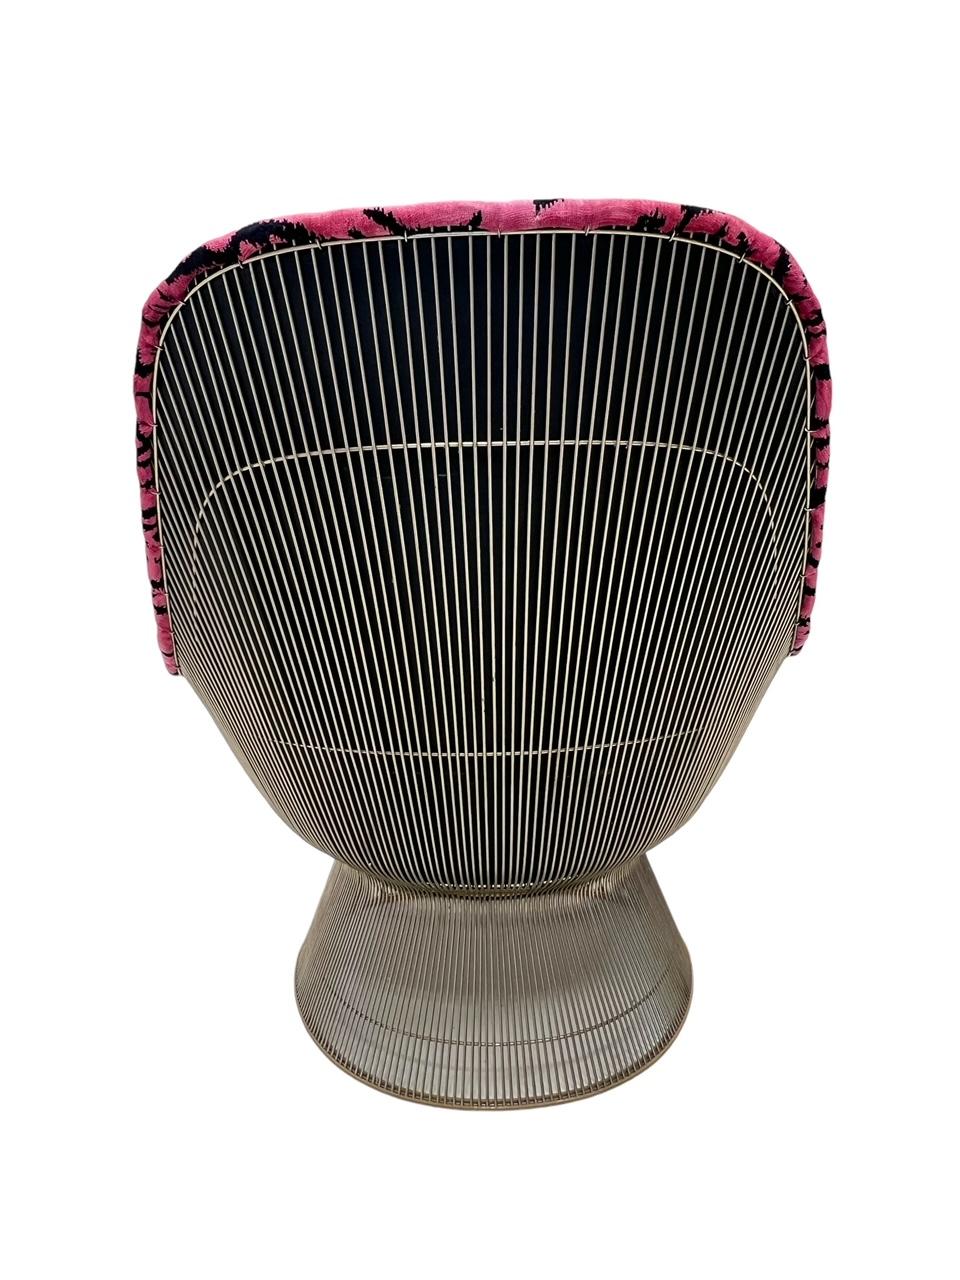 Warren Platner Easy Chair and Ottoman in Scalamandre Pink Tigre Fabric In Good Condition For Sale In Saint Louis, US